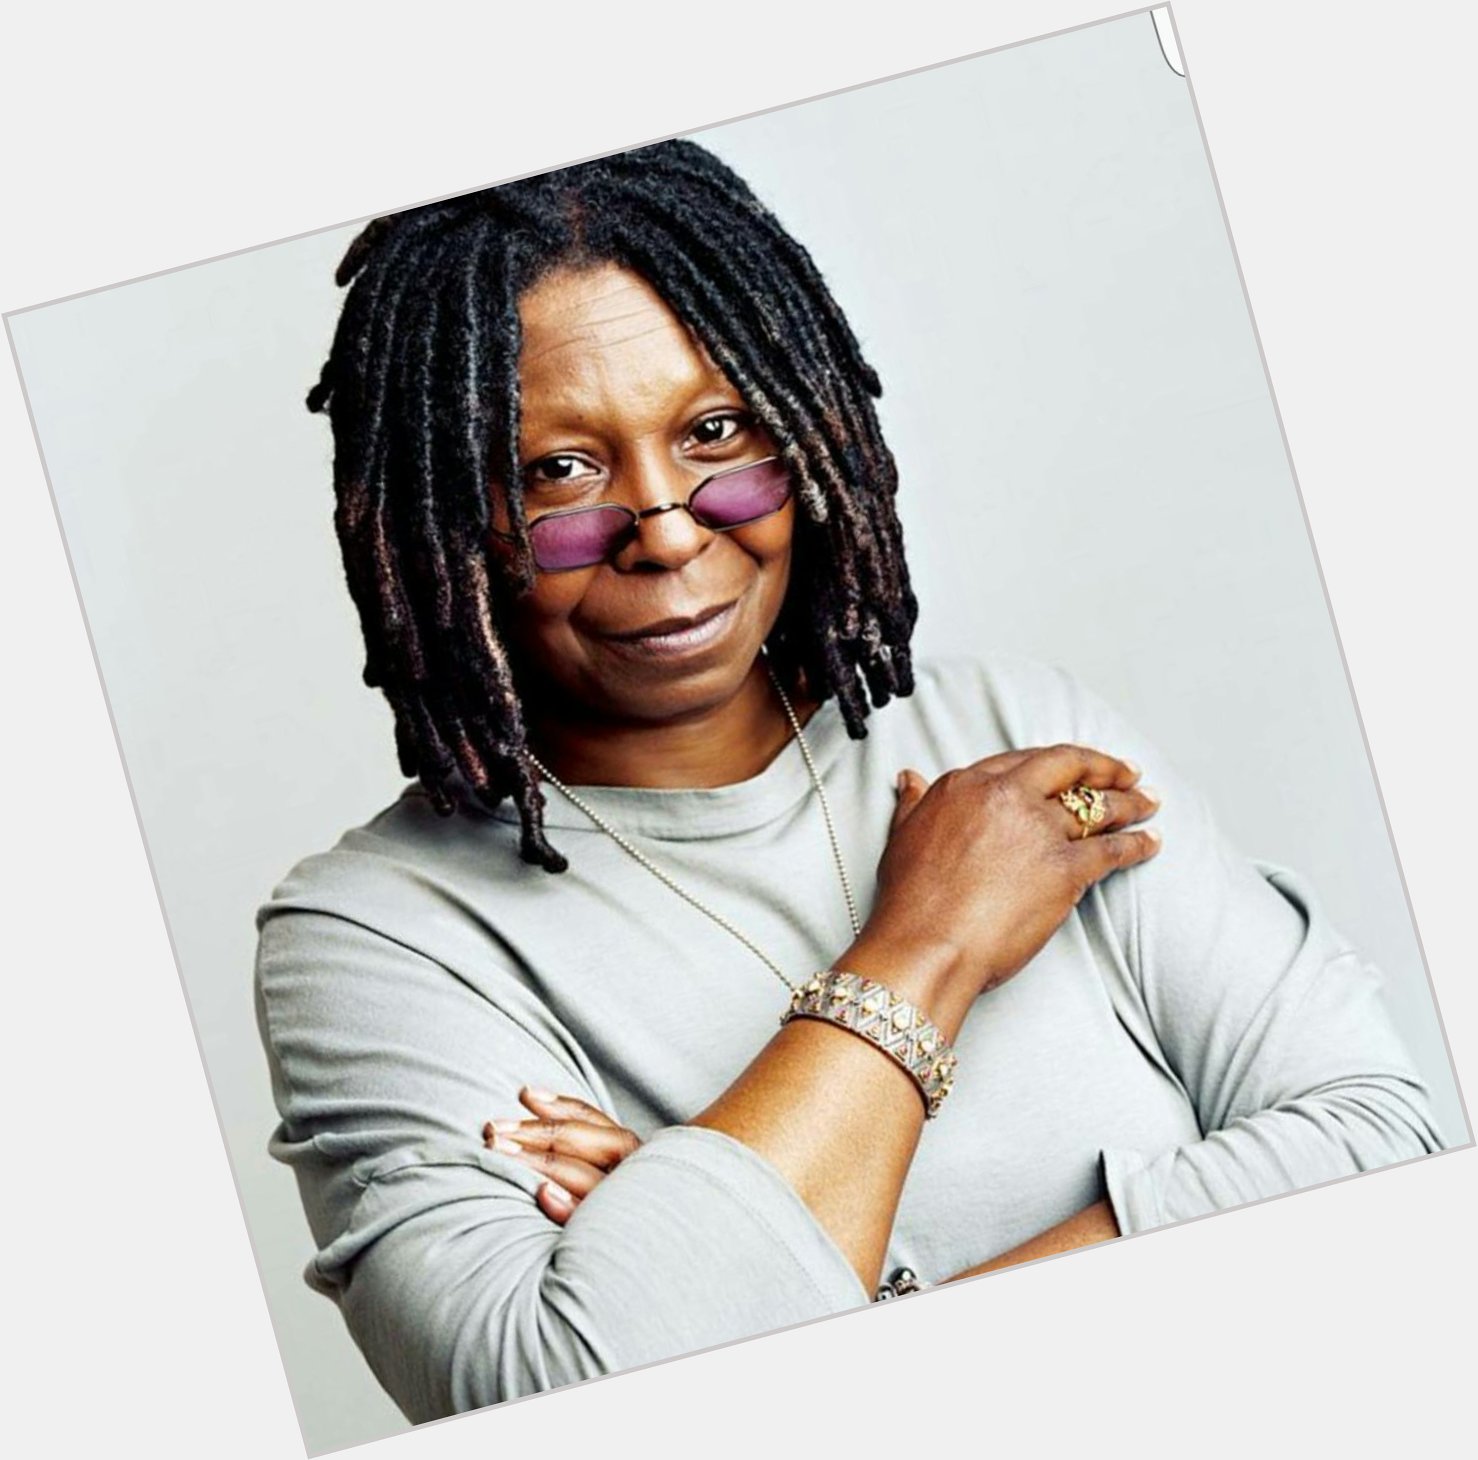 Happy Birthday Whoopi Goldberg!  What is your favorite Whoopi moment? 